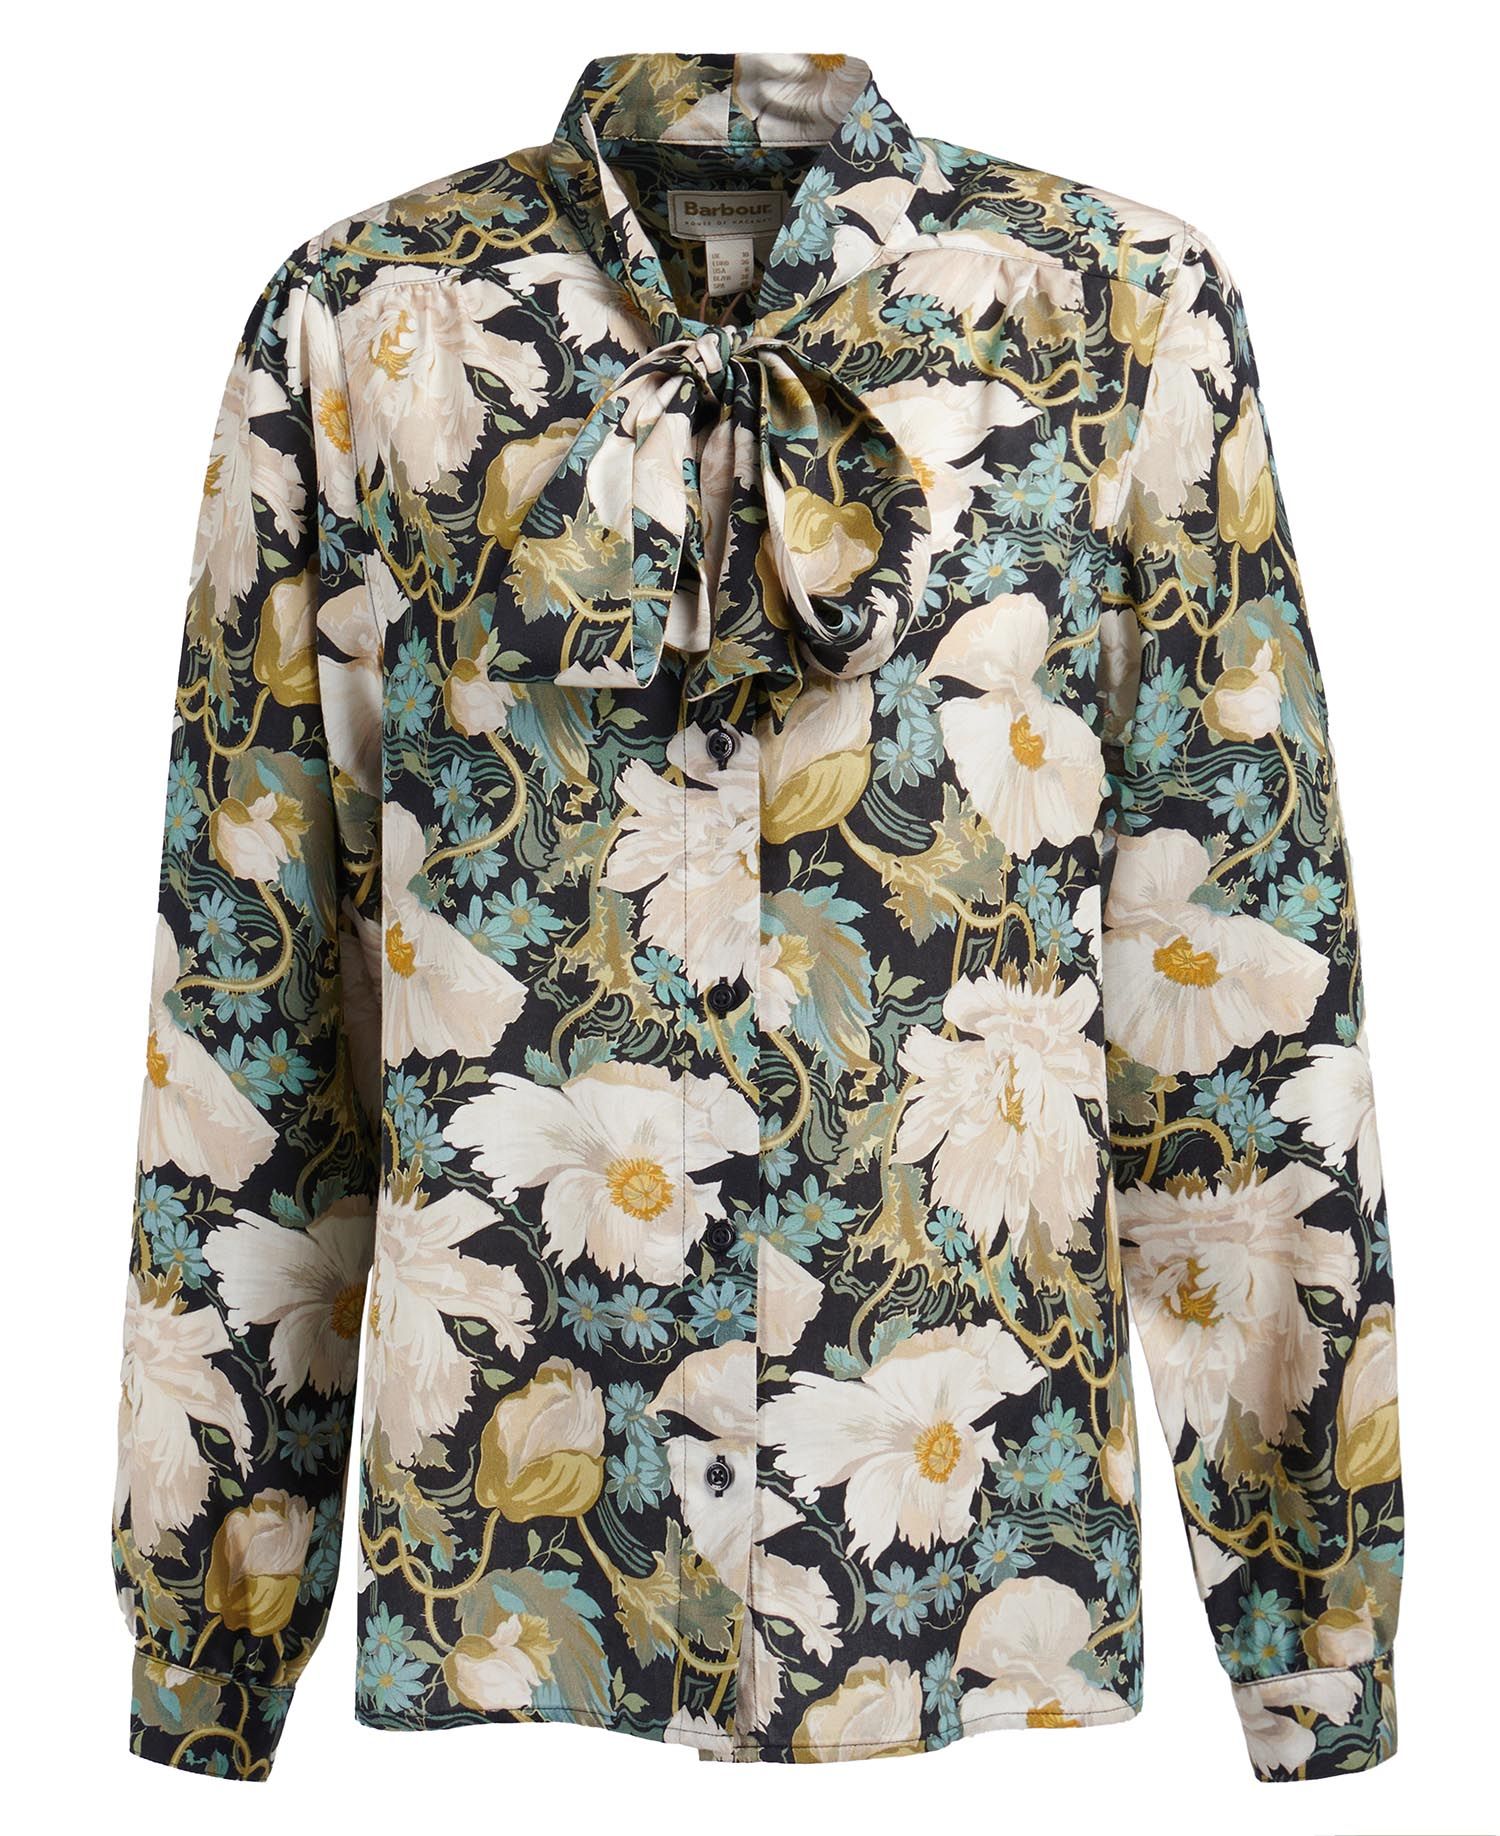 Barbour x House of Hackney Daintry Shirt